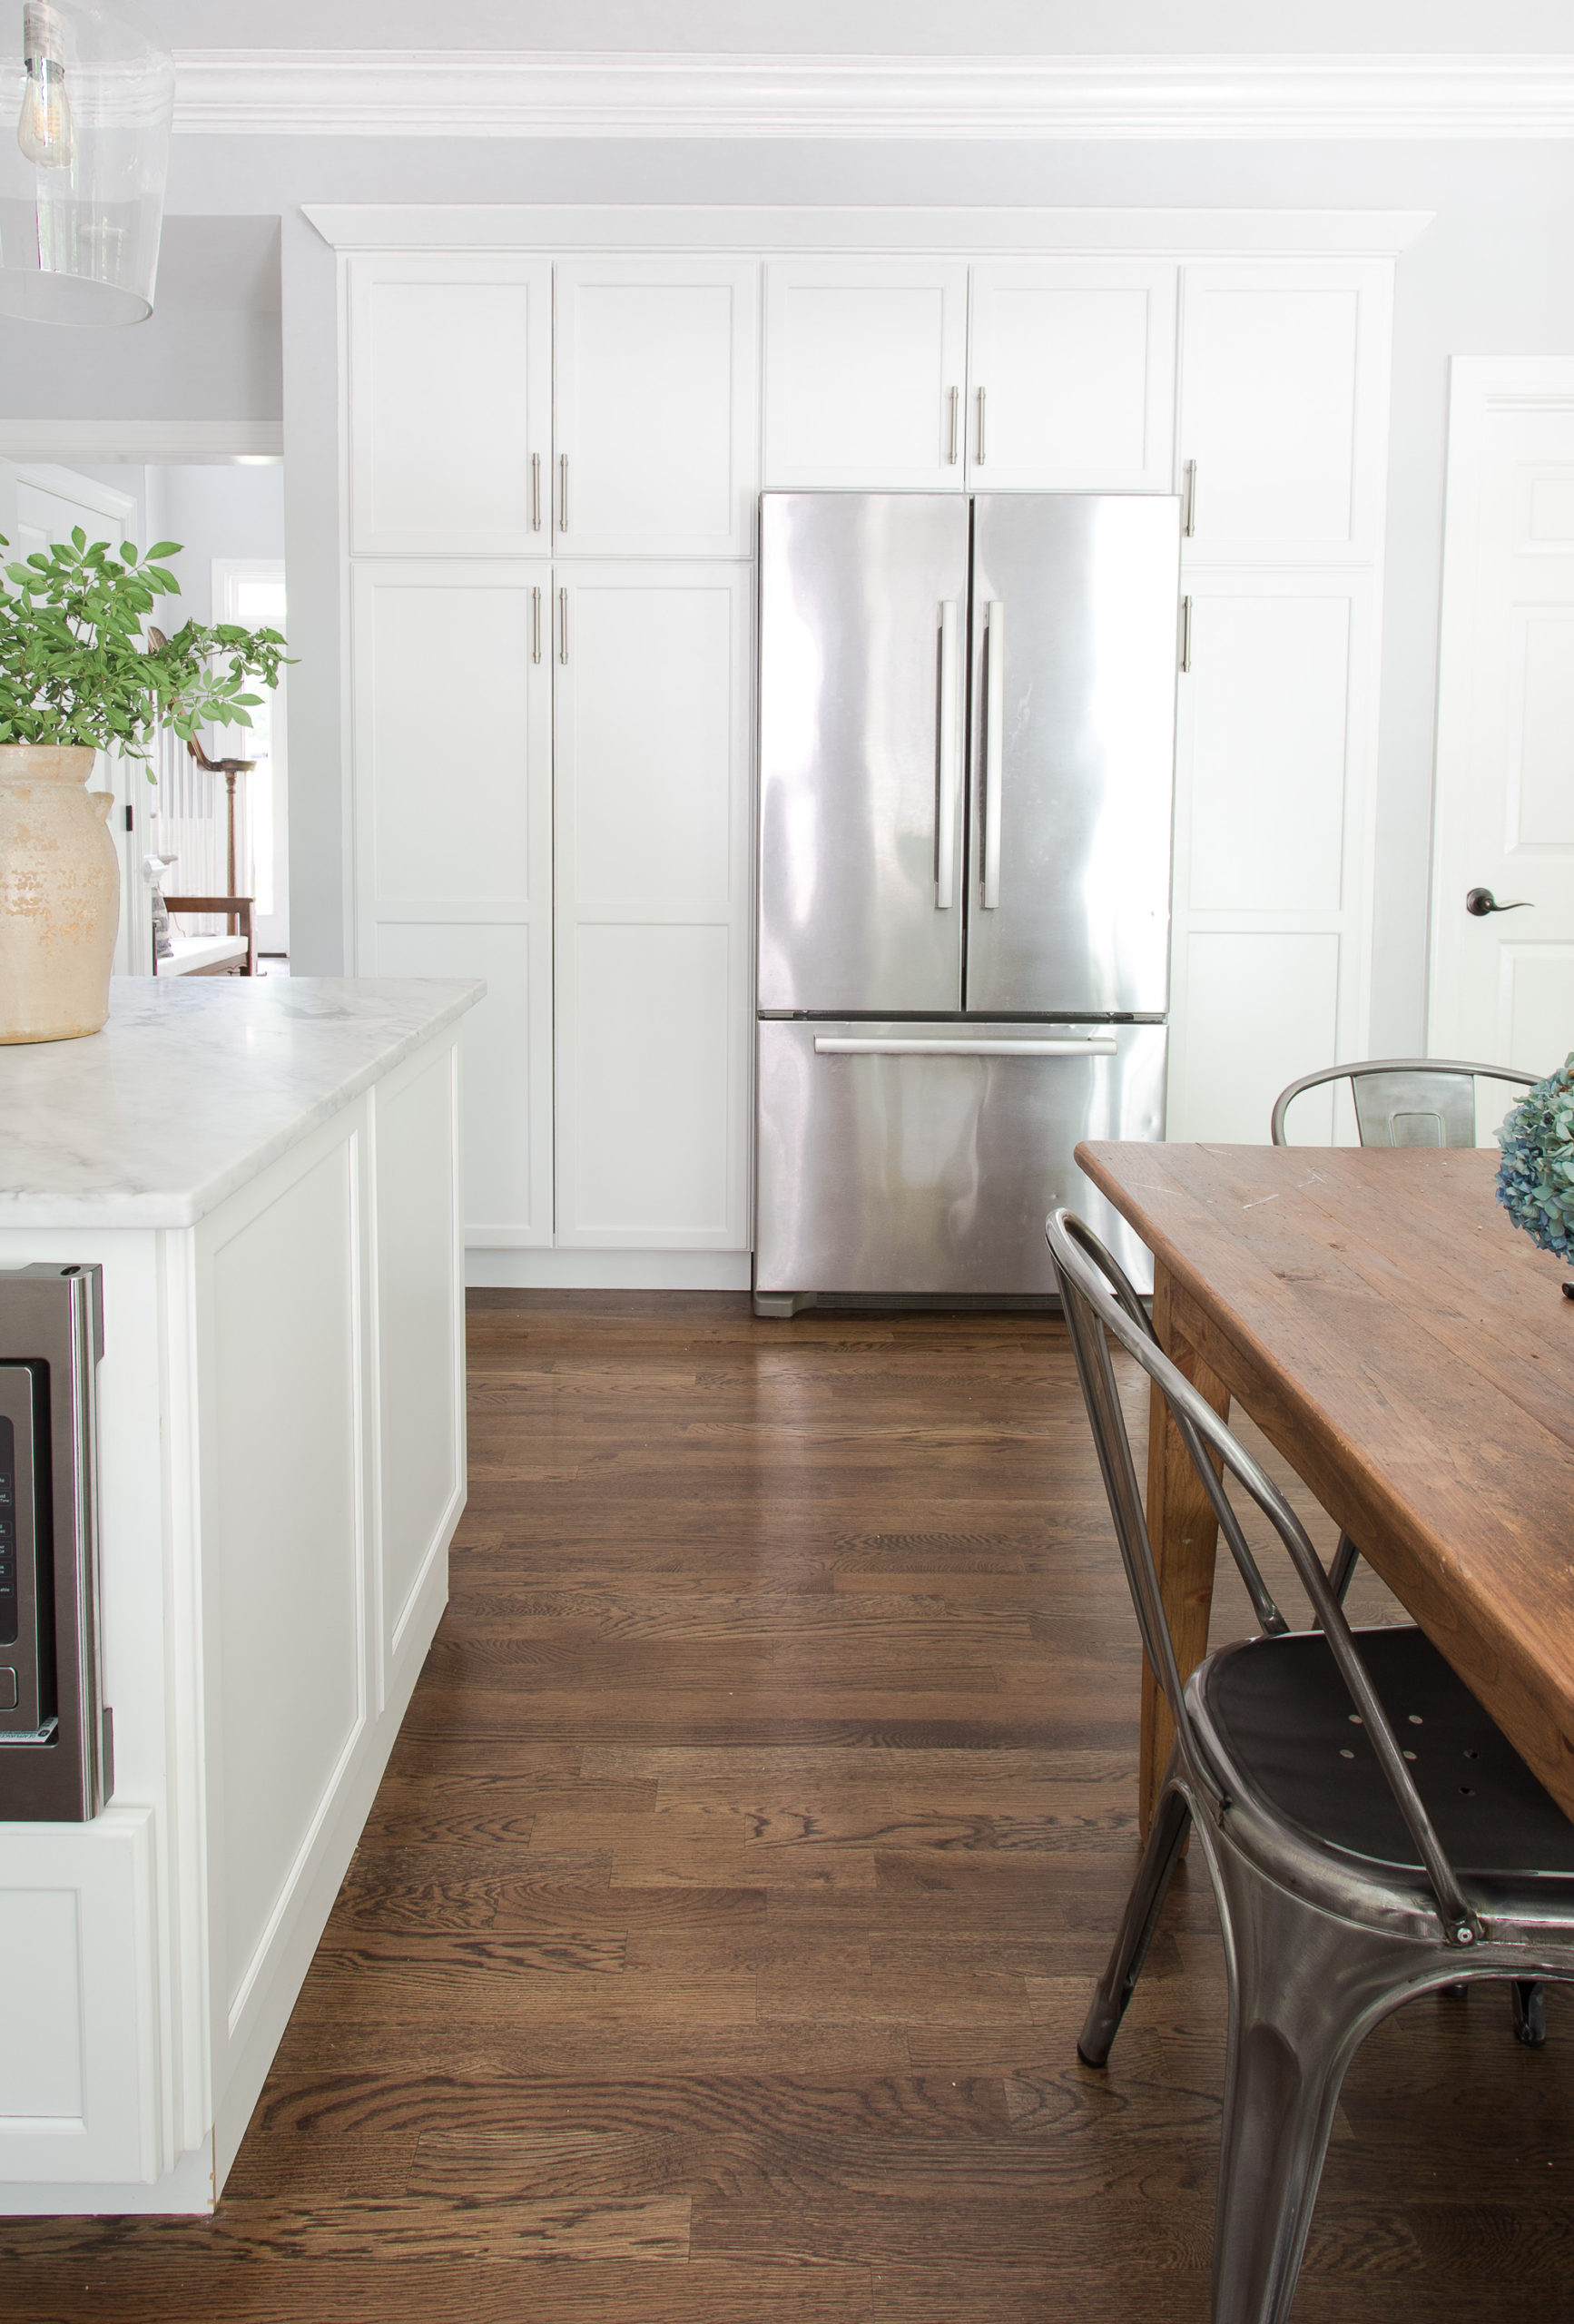 stainless steel fridge built into white kitchen cabinets with a wooden table and chairs near it. 